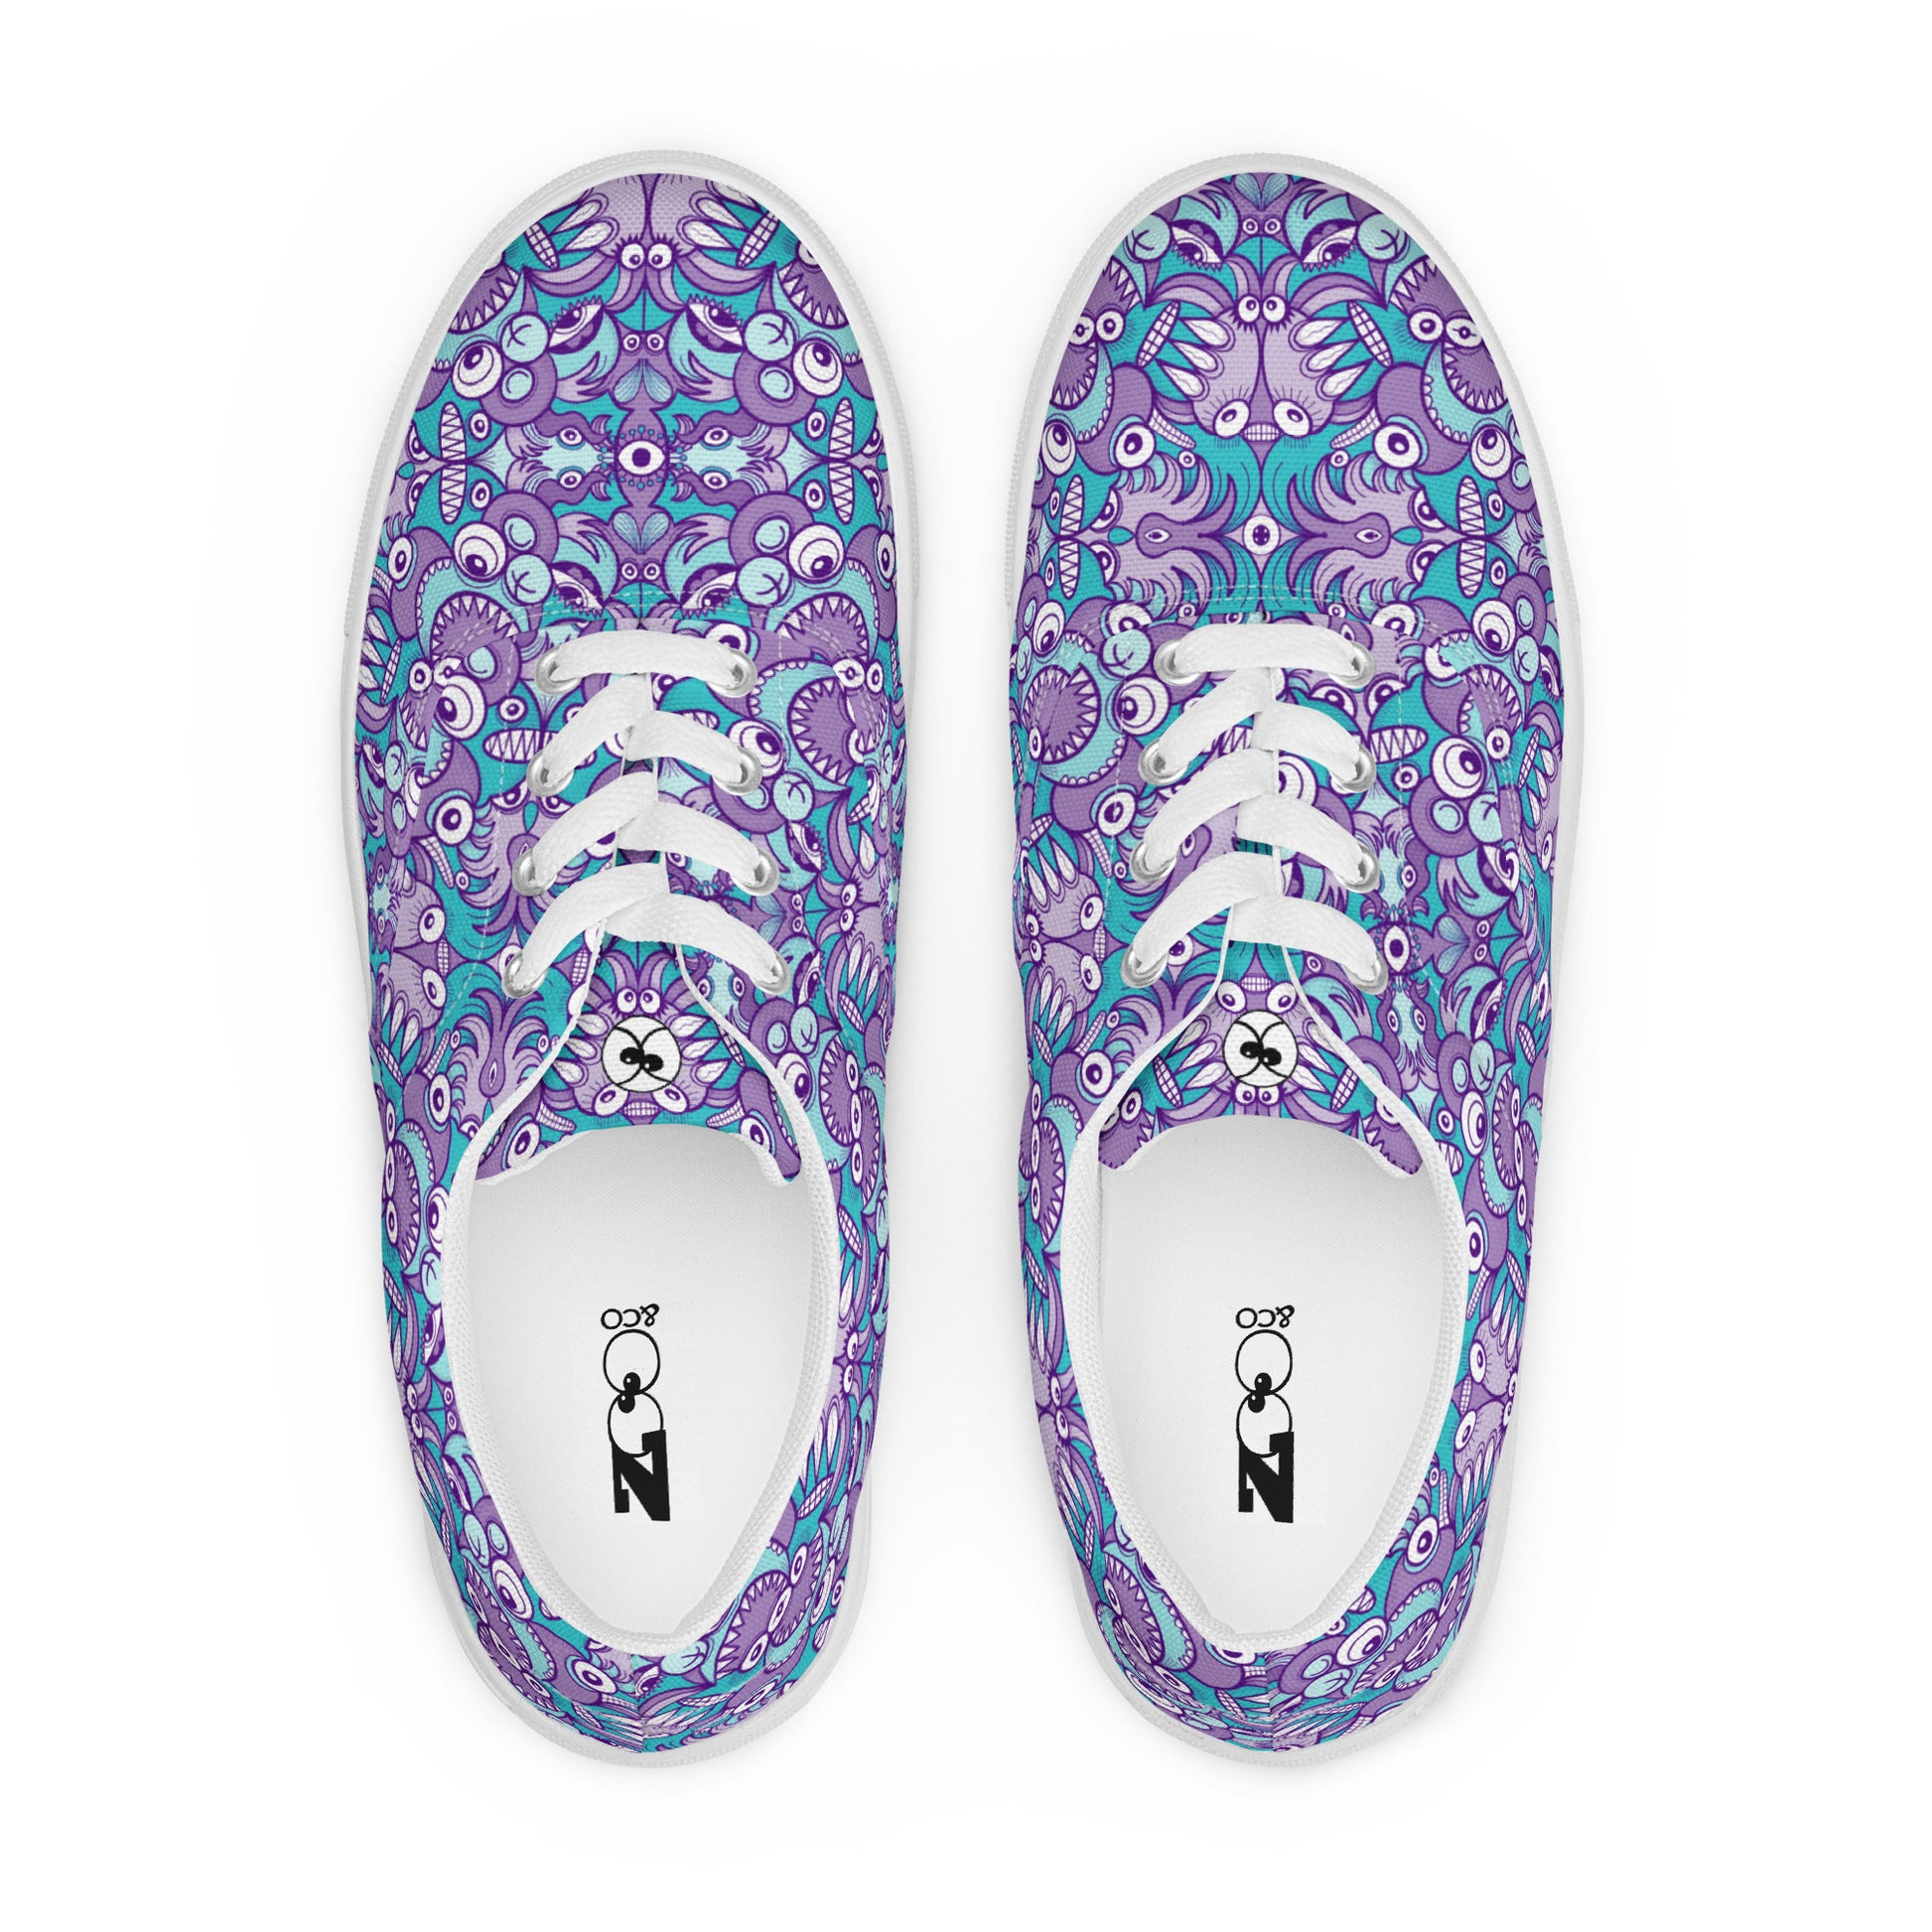 Planet 5: Aquatic Creatures from the Doodles of the Galaxy - Women’s lace-up canvas shoes. Top view